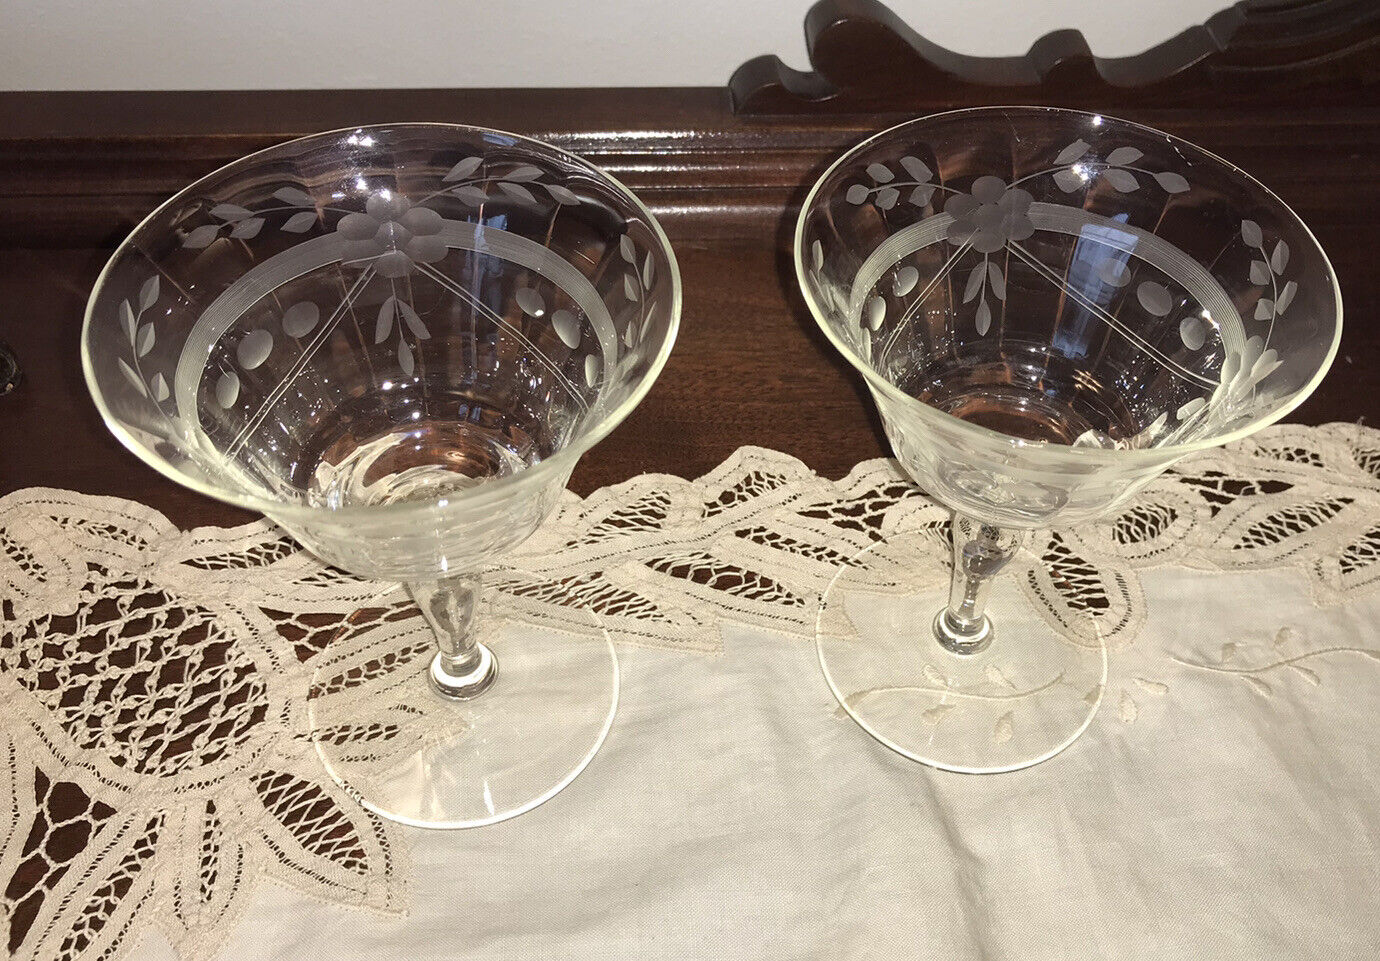 ETCHED FLORAL VTG SHERBET COUPE CHAMPAGNE GLASSES (2)PINSTRIPE BAND 16 PANEL EUC